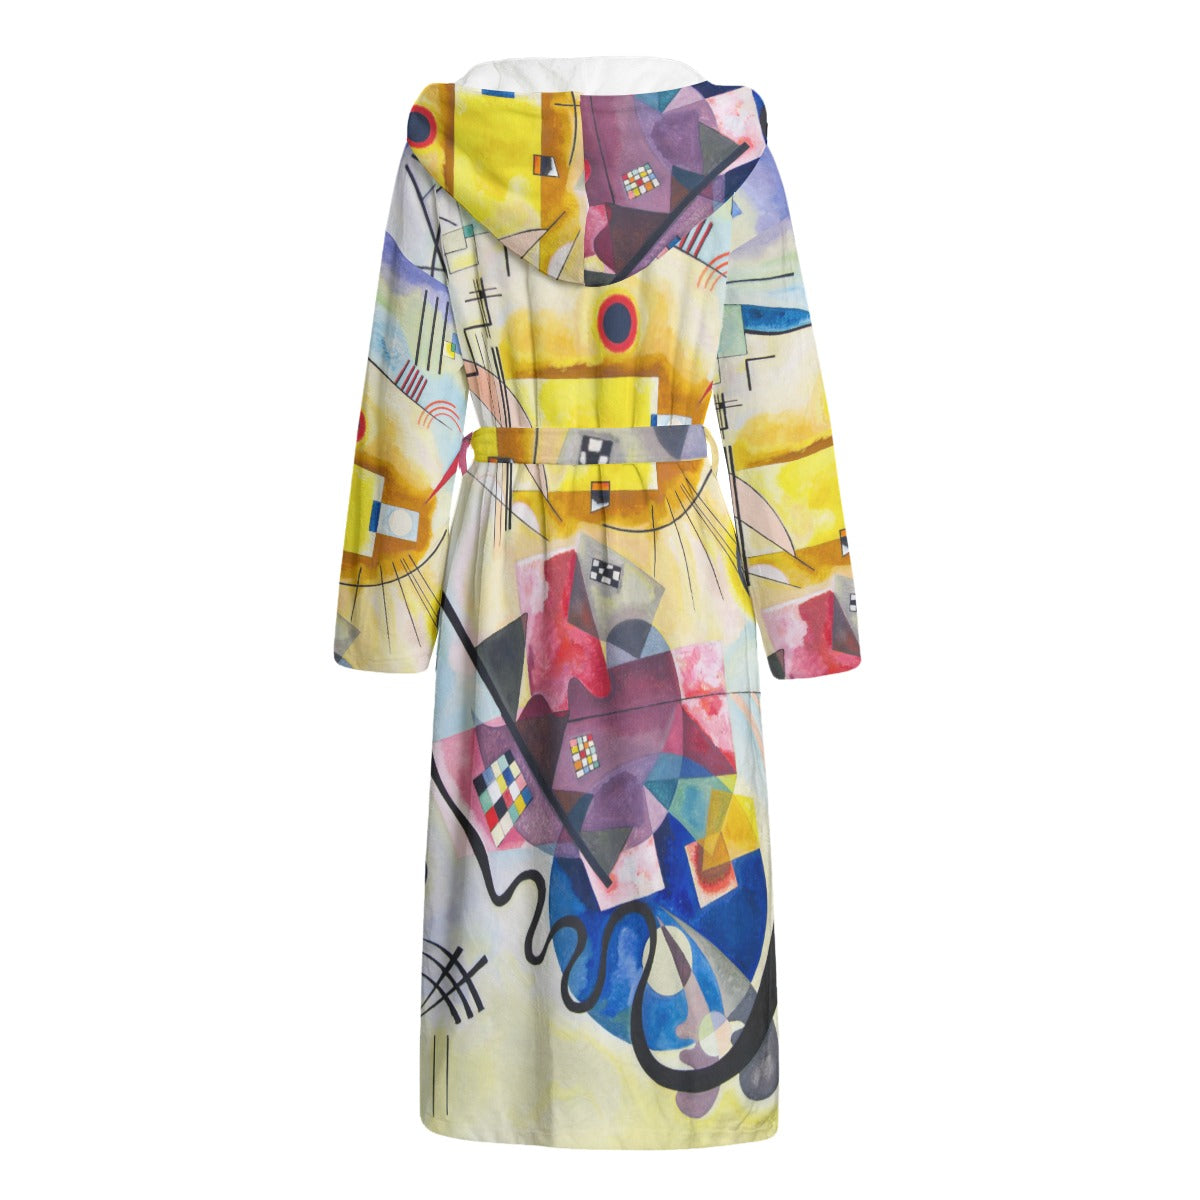 Unisex Abstract Art Robe - Side View